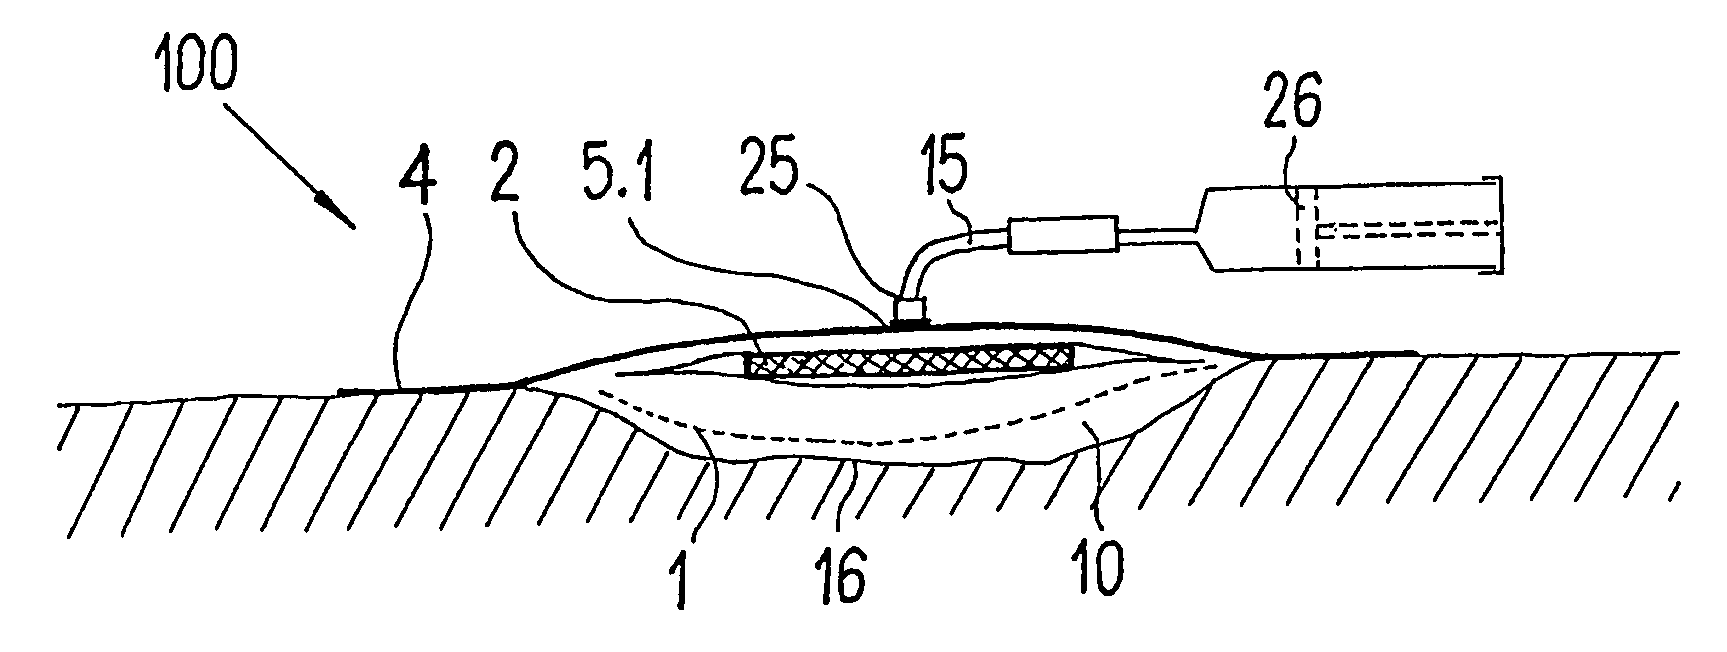 Device for the Treatment of Wounds Using a Vacuum